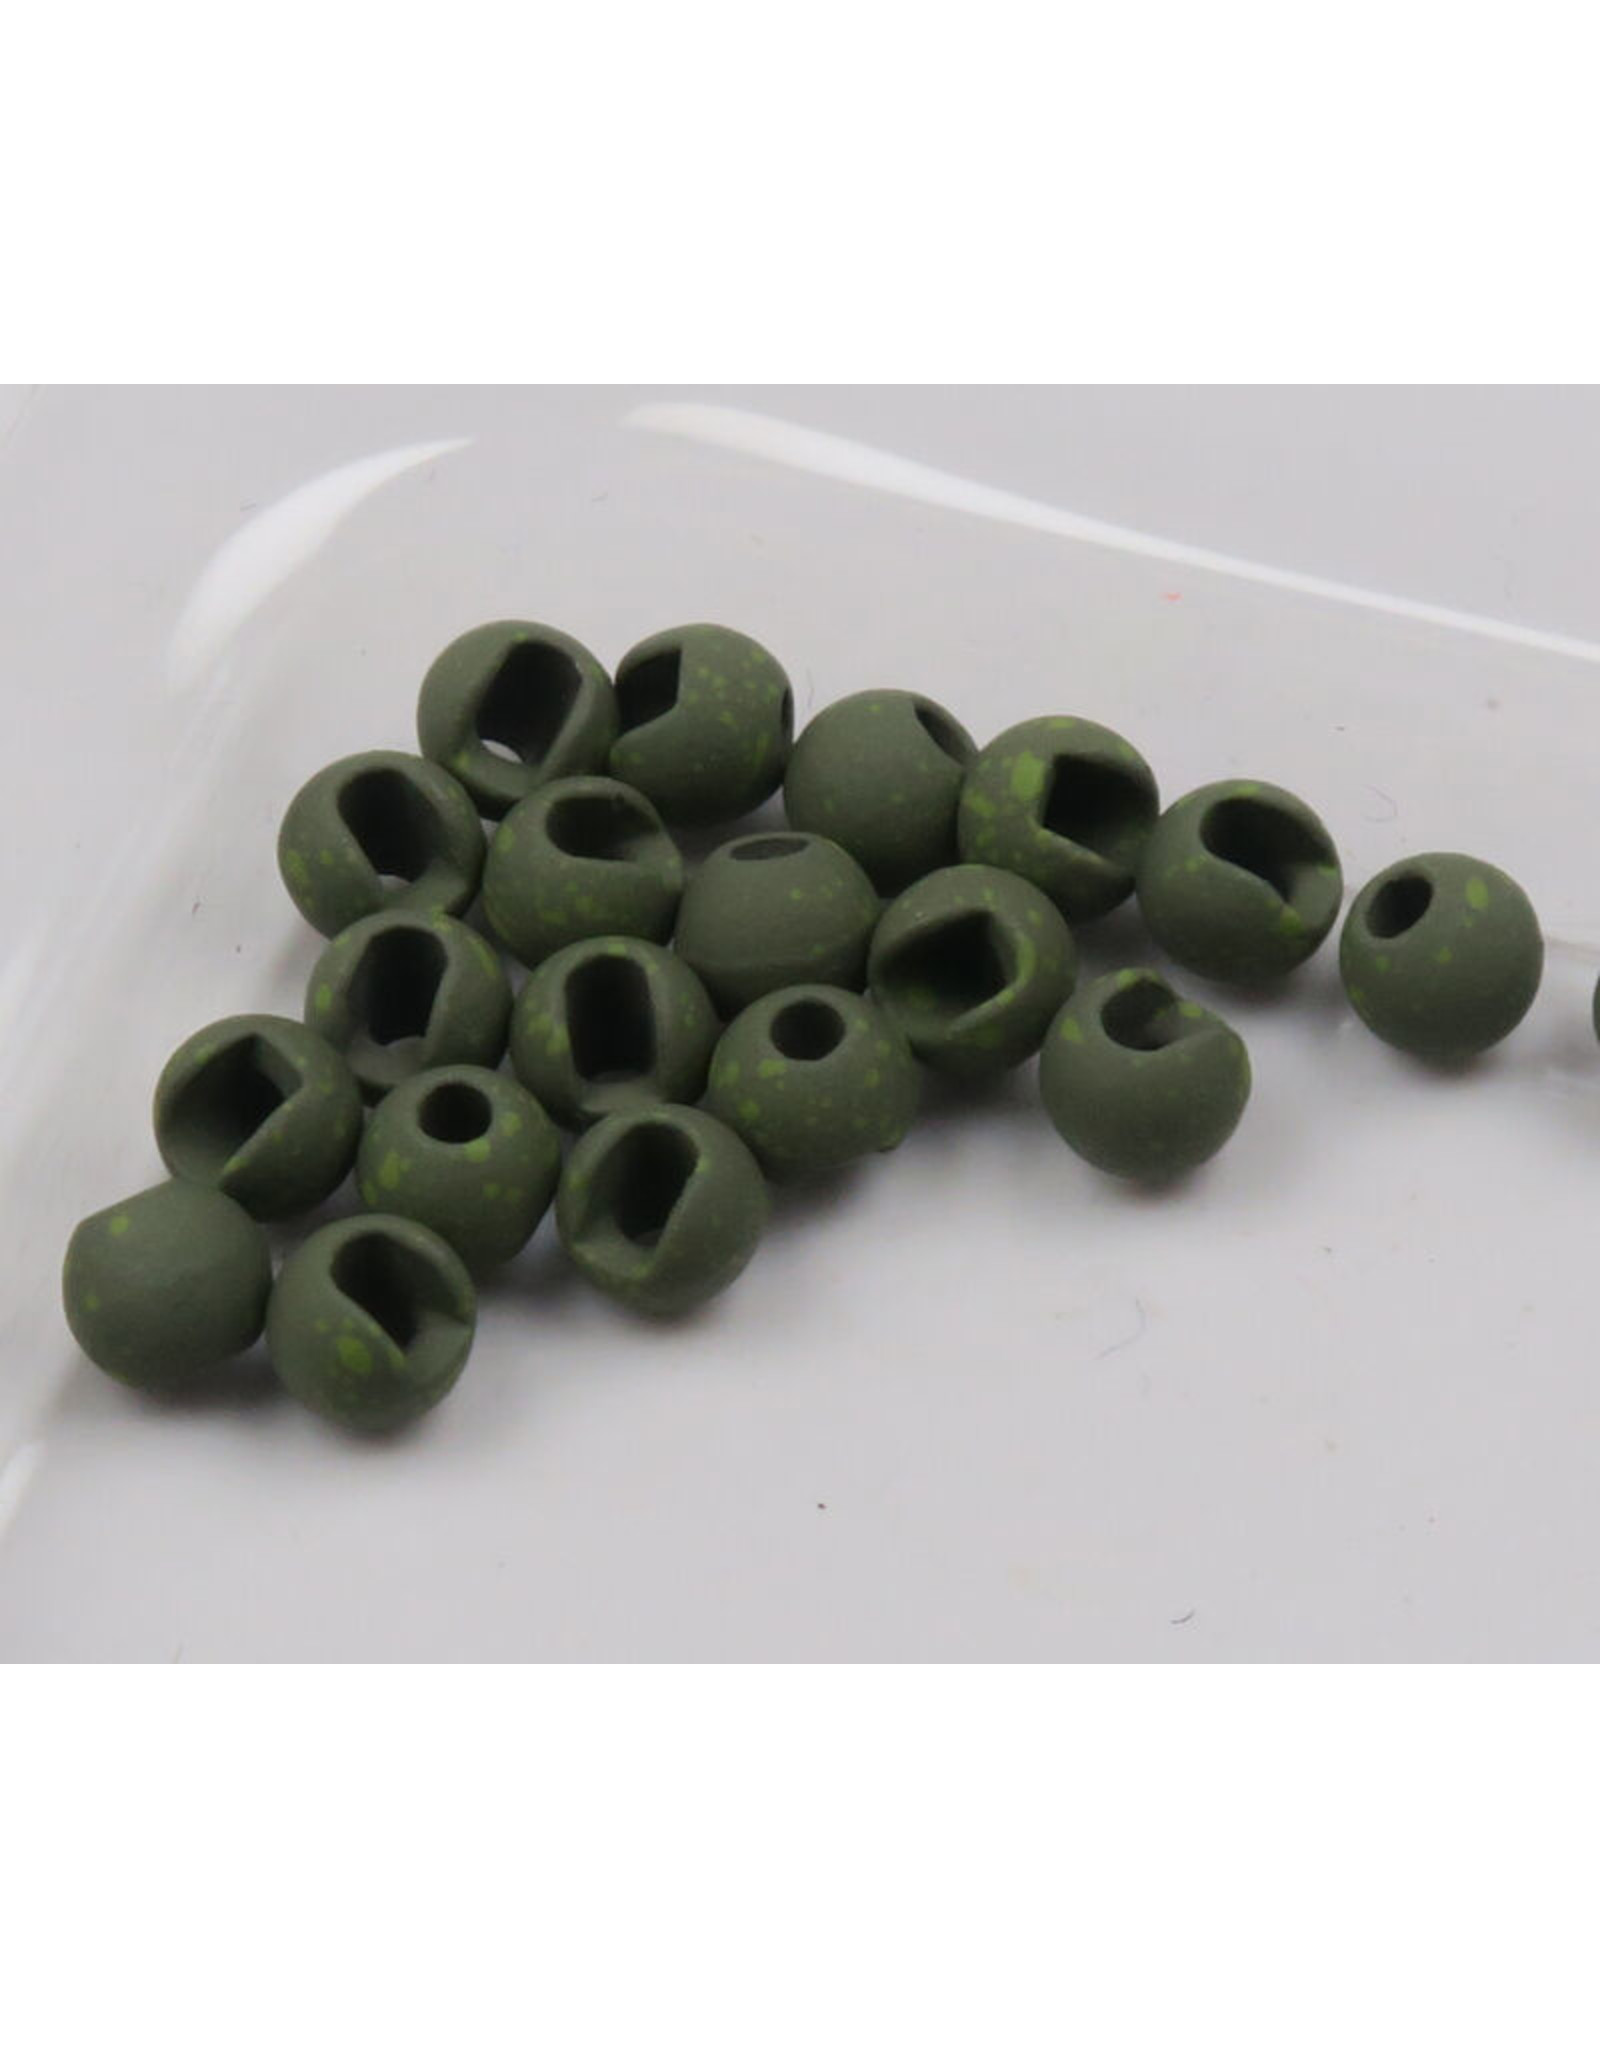 HARELINE Mottled Tactical (SLOTTED) Tungsten Beads